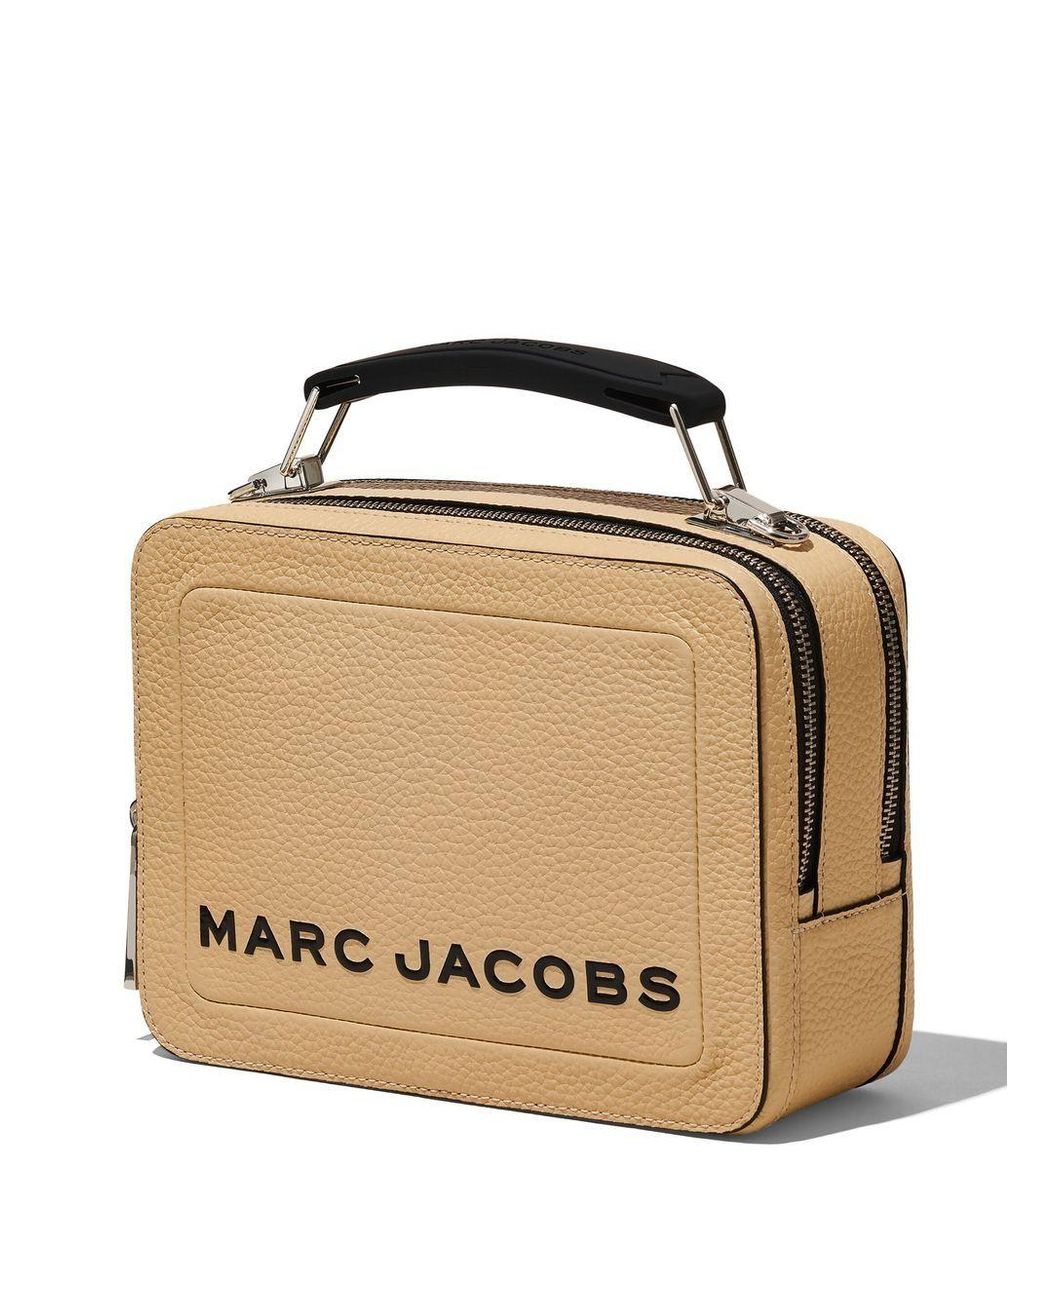 Marc Jacobs The Textured Box 23 Bag | Lyst